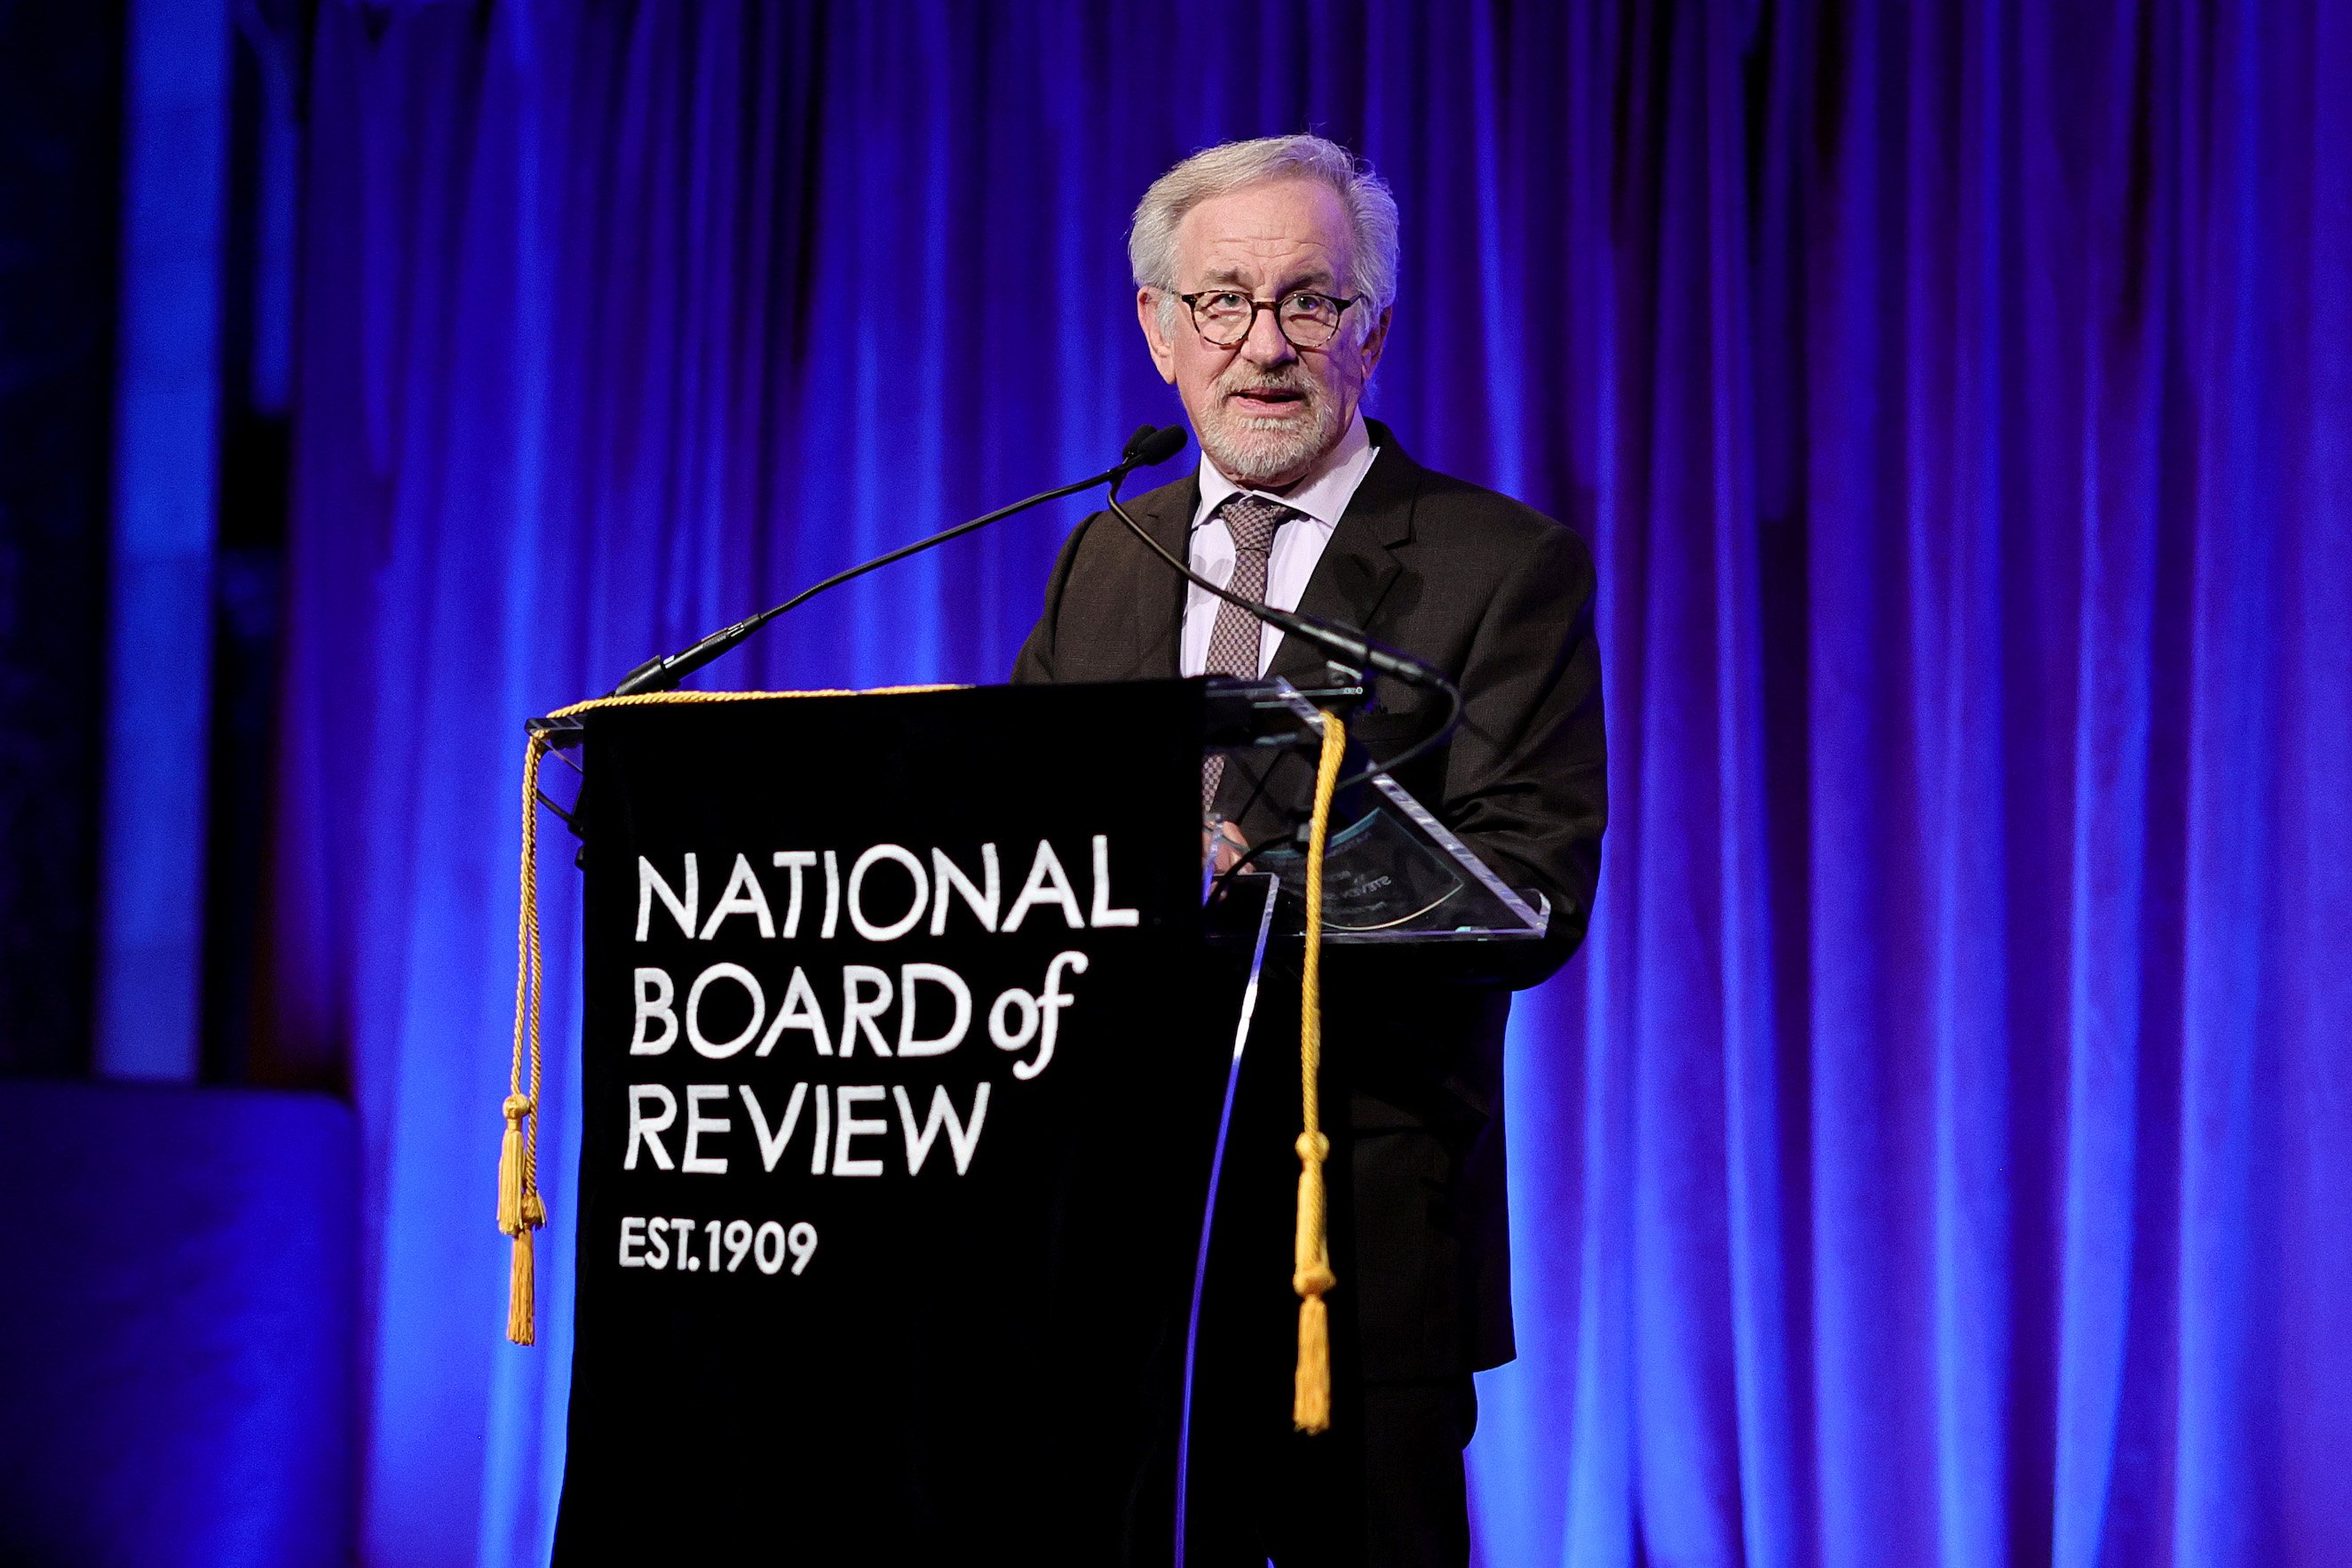 Steven Spielberg accepts the Best Director award for 'The Fabelmans' during the National Board of Review 2023 Awards Gala